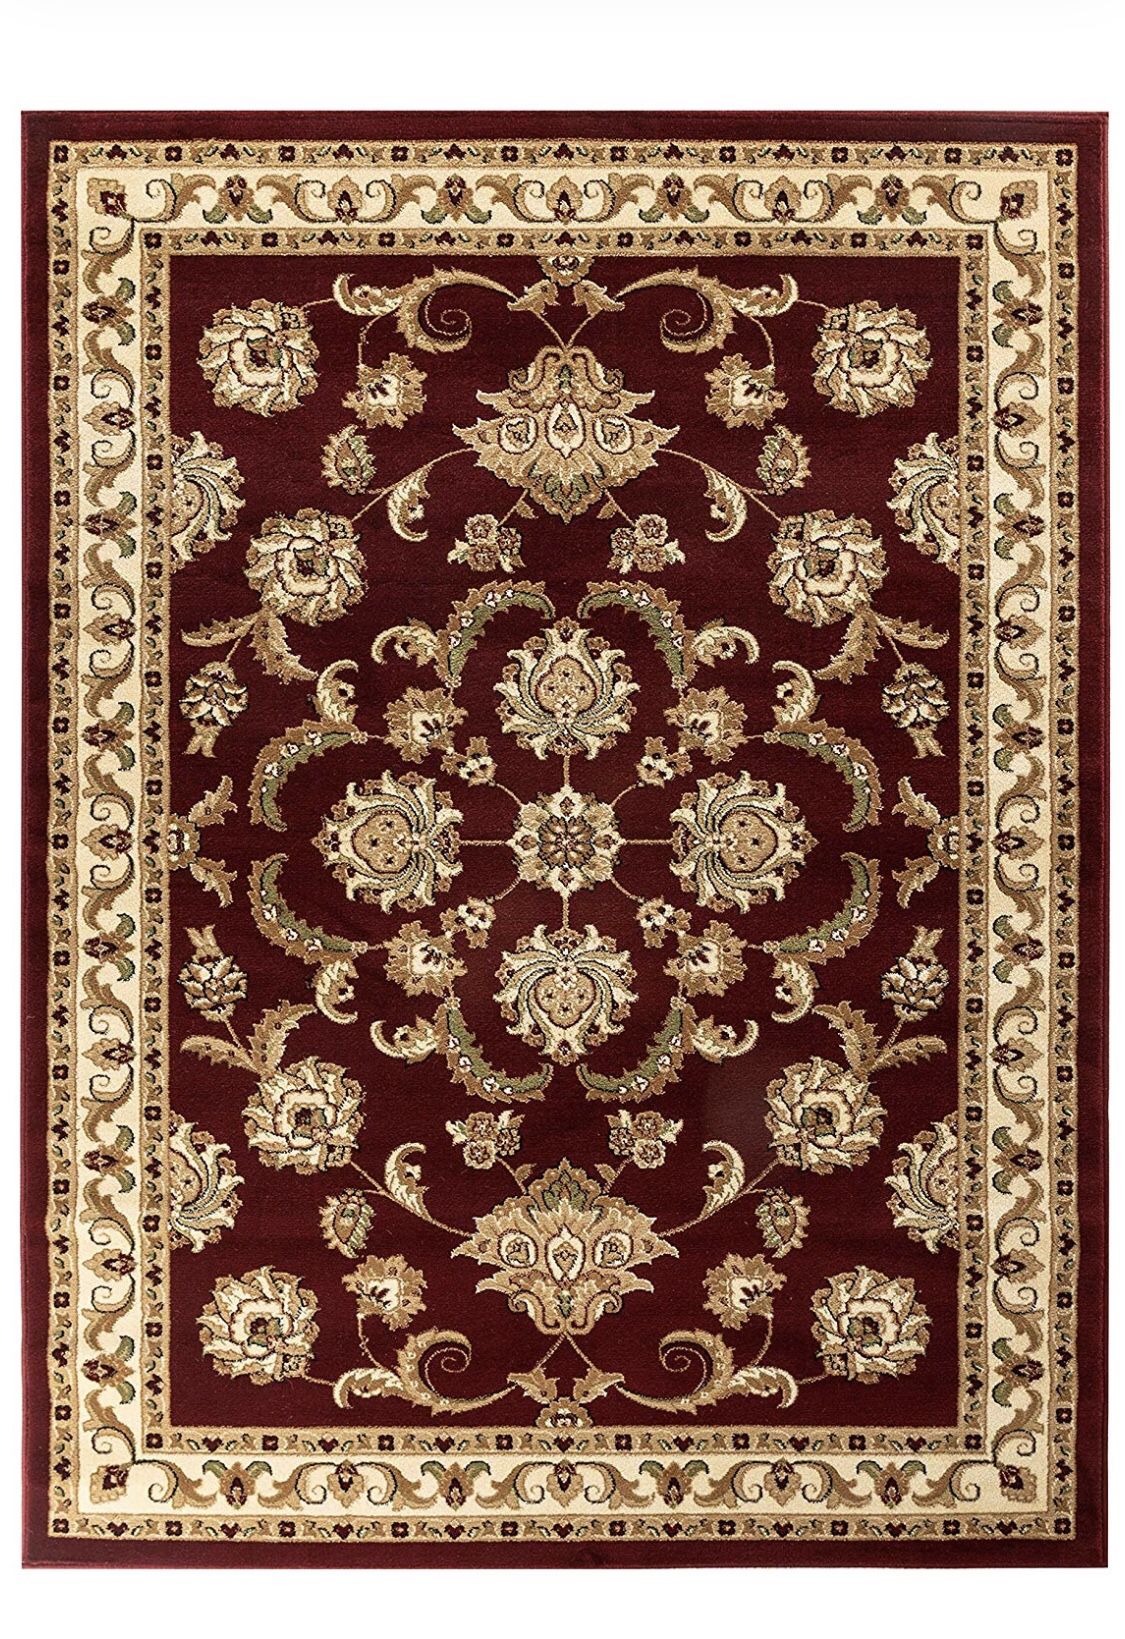 New red rug size 8x11 nice carpet Persian style rugs